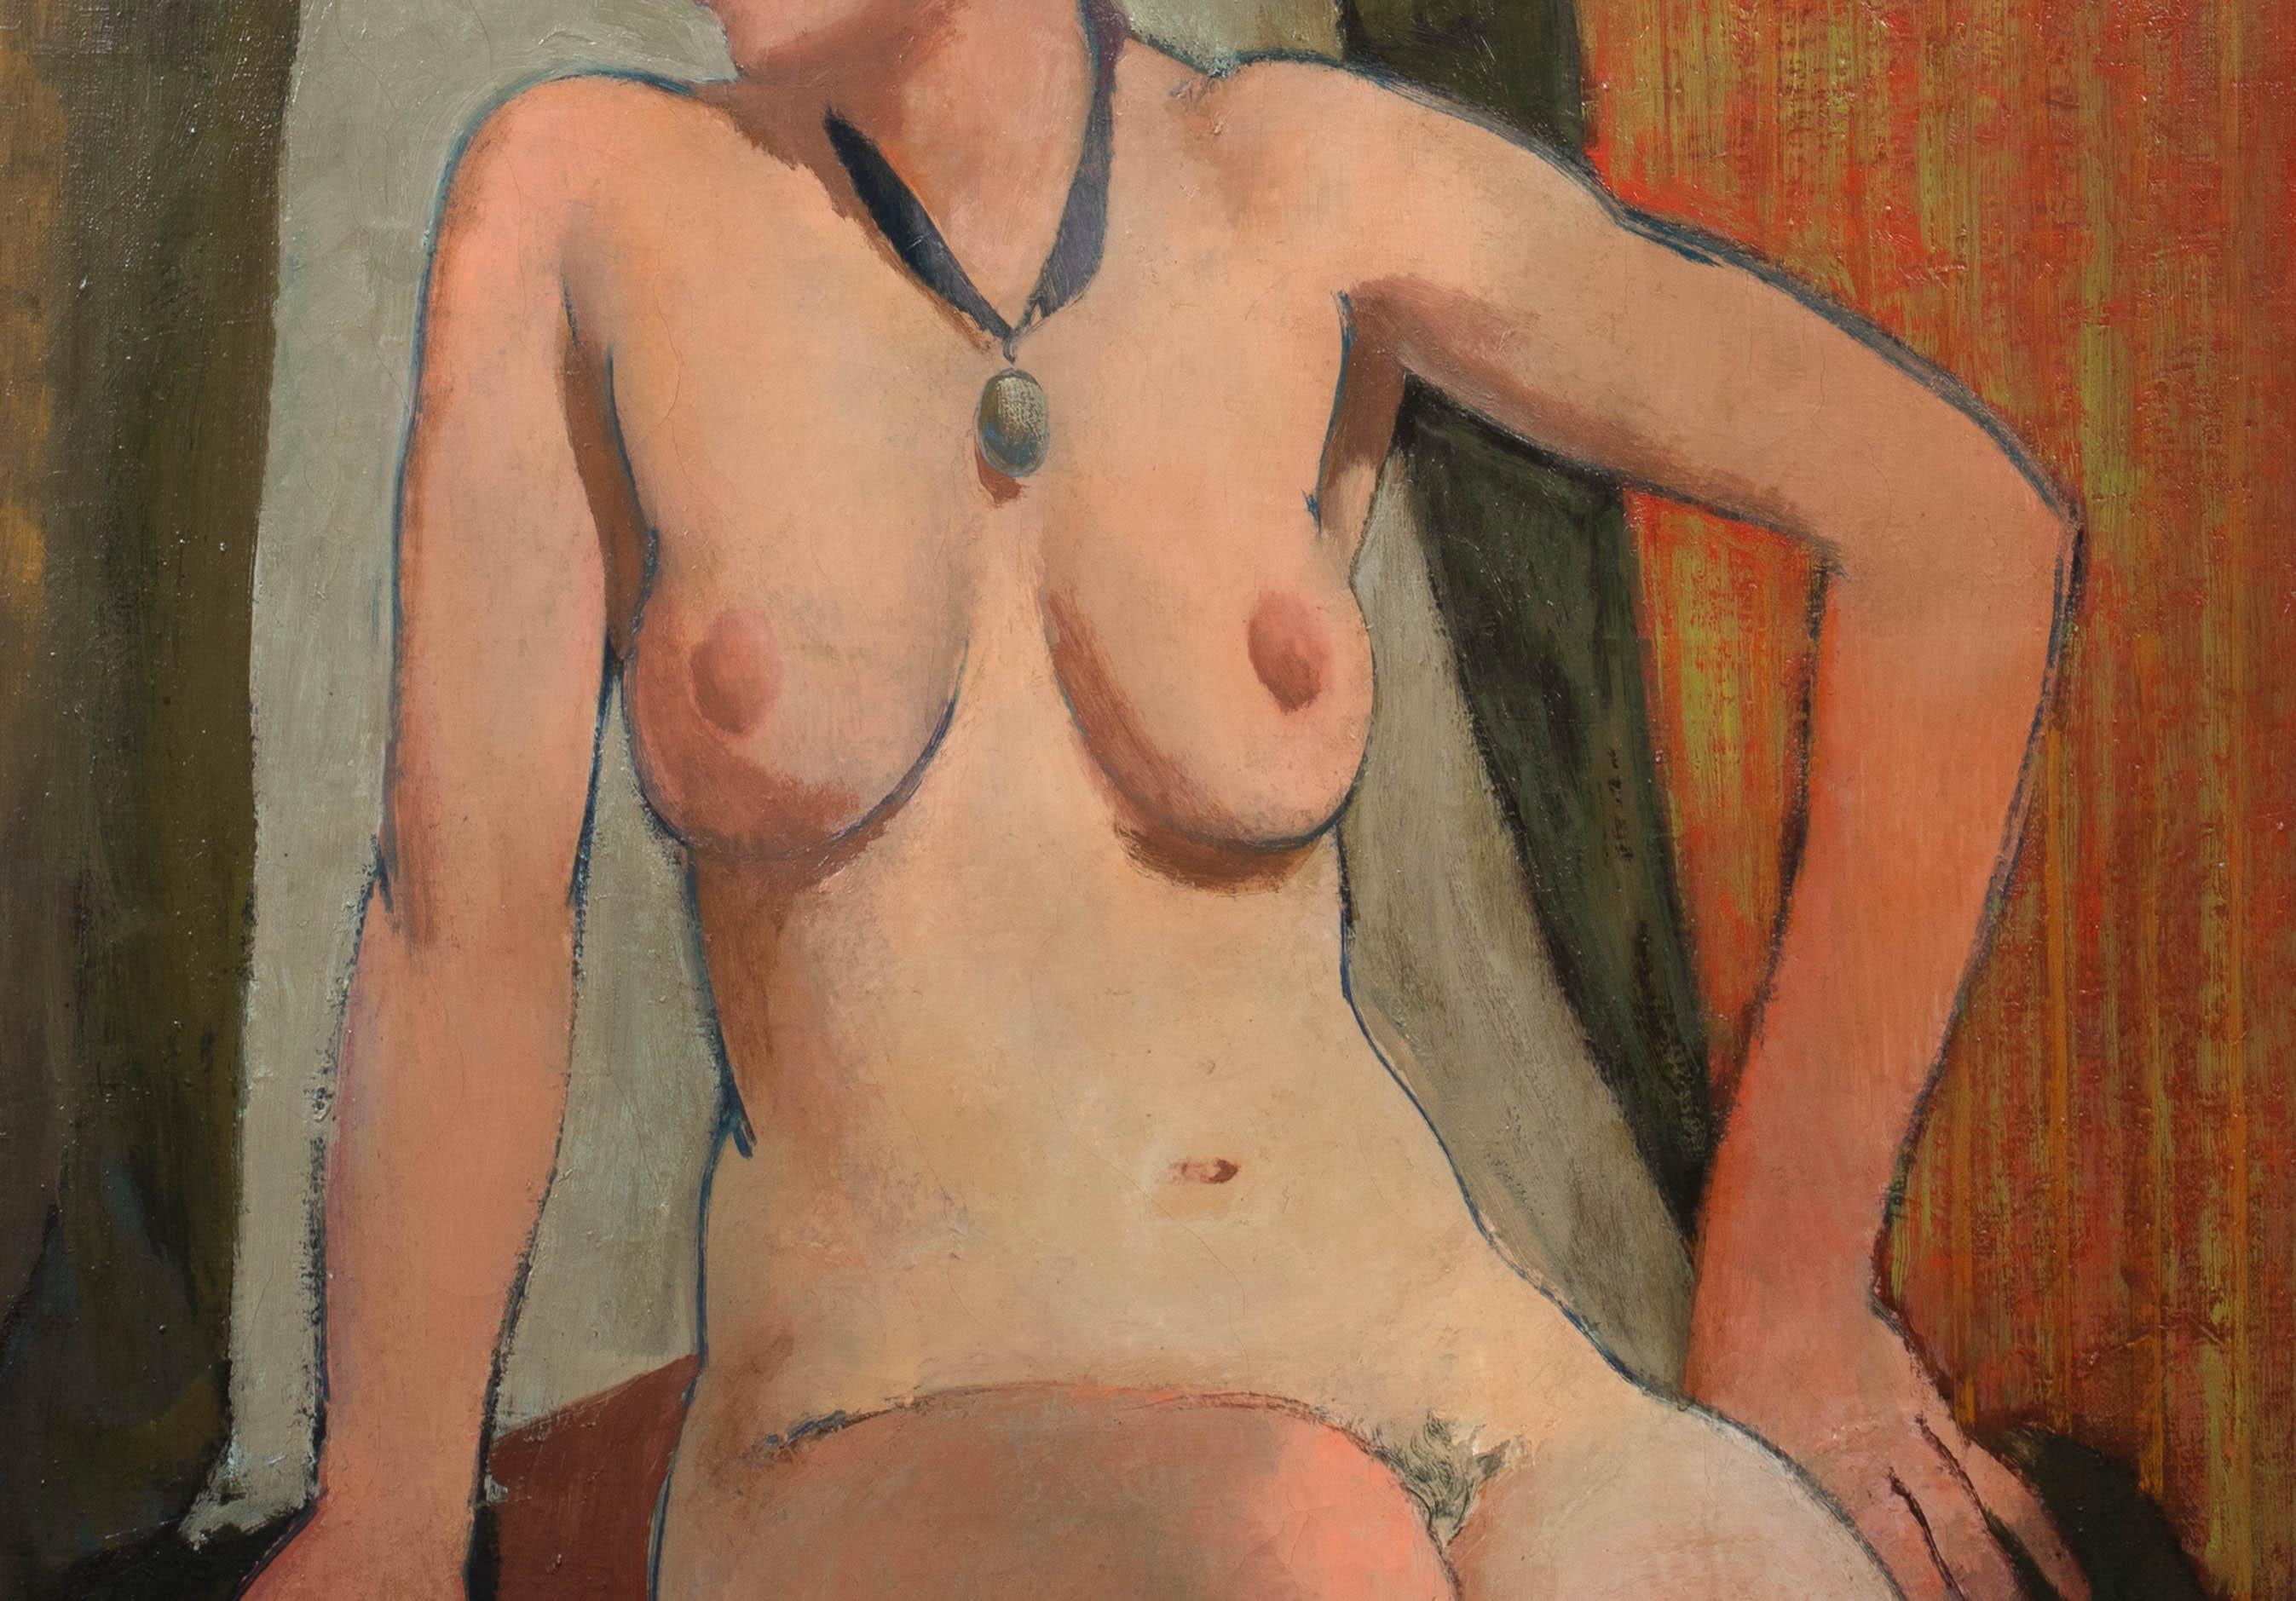 NUDE WITH NECKLACE, circa 1940

by WILLIAM CROSBIE (1915-1999)

Large circa 1940 portrait of a nude wearing a necklace, oil on canvas by William Crosbie. Early and important nude study whilst painting in Paris inspired by Modigliani by the prolific